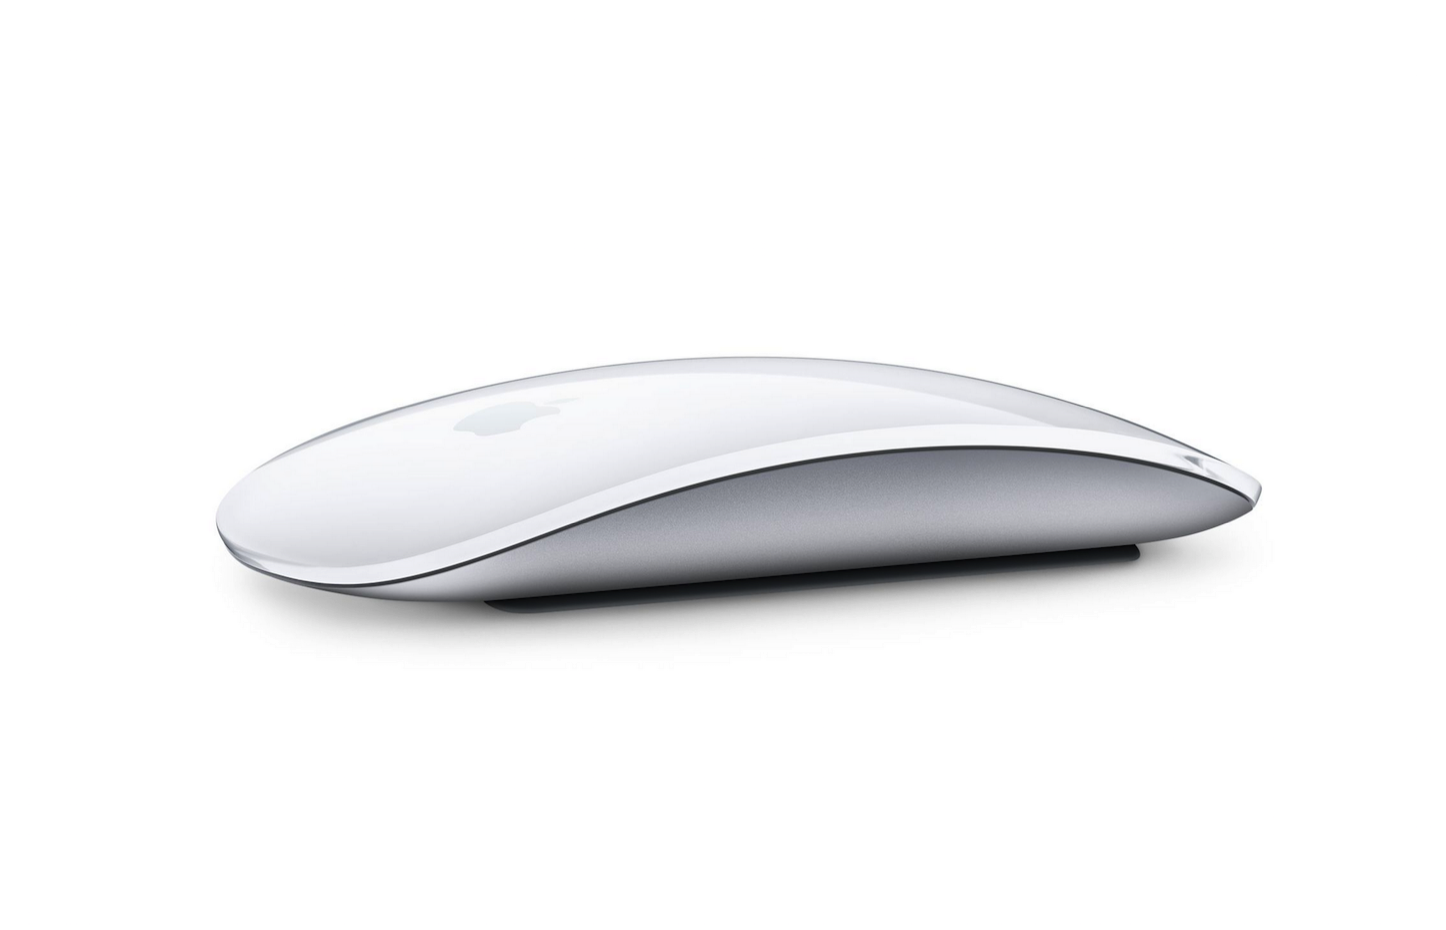 Magic-Mouse-2-1.png